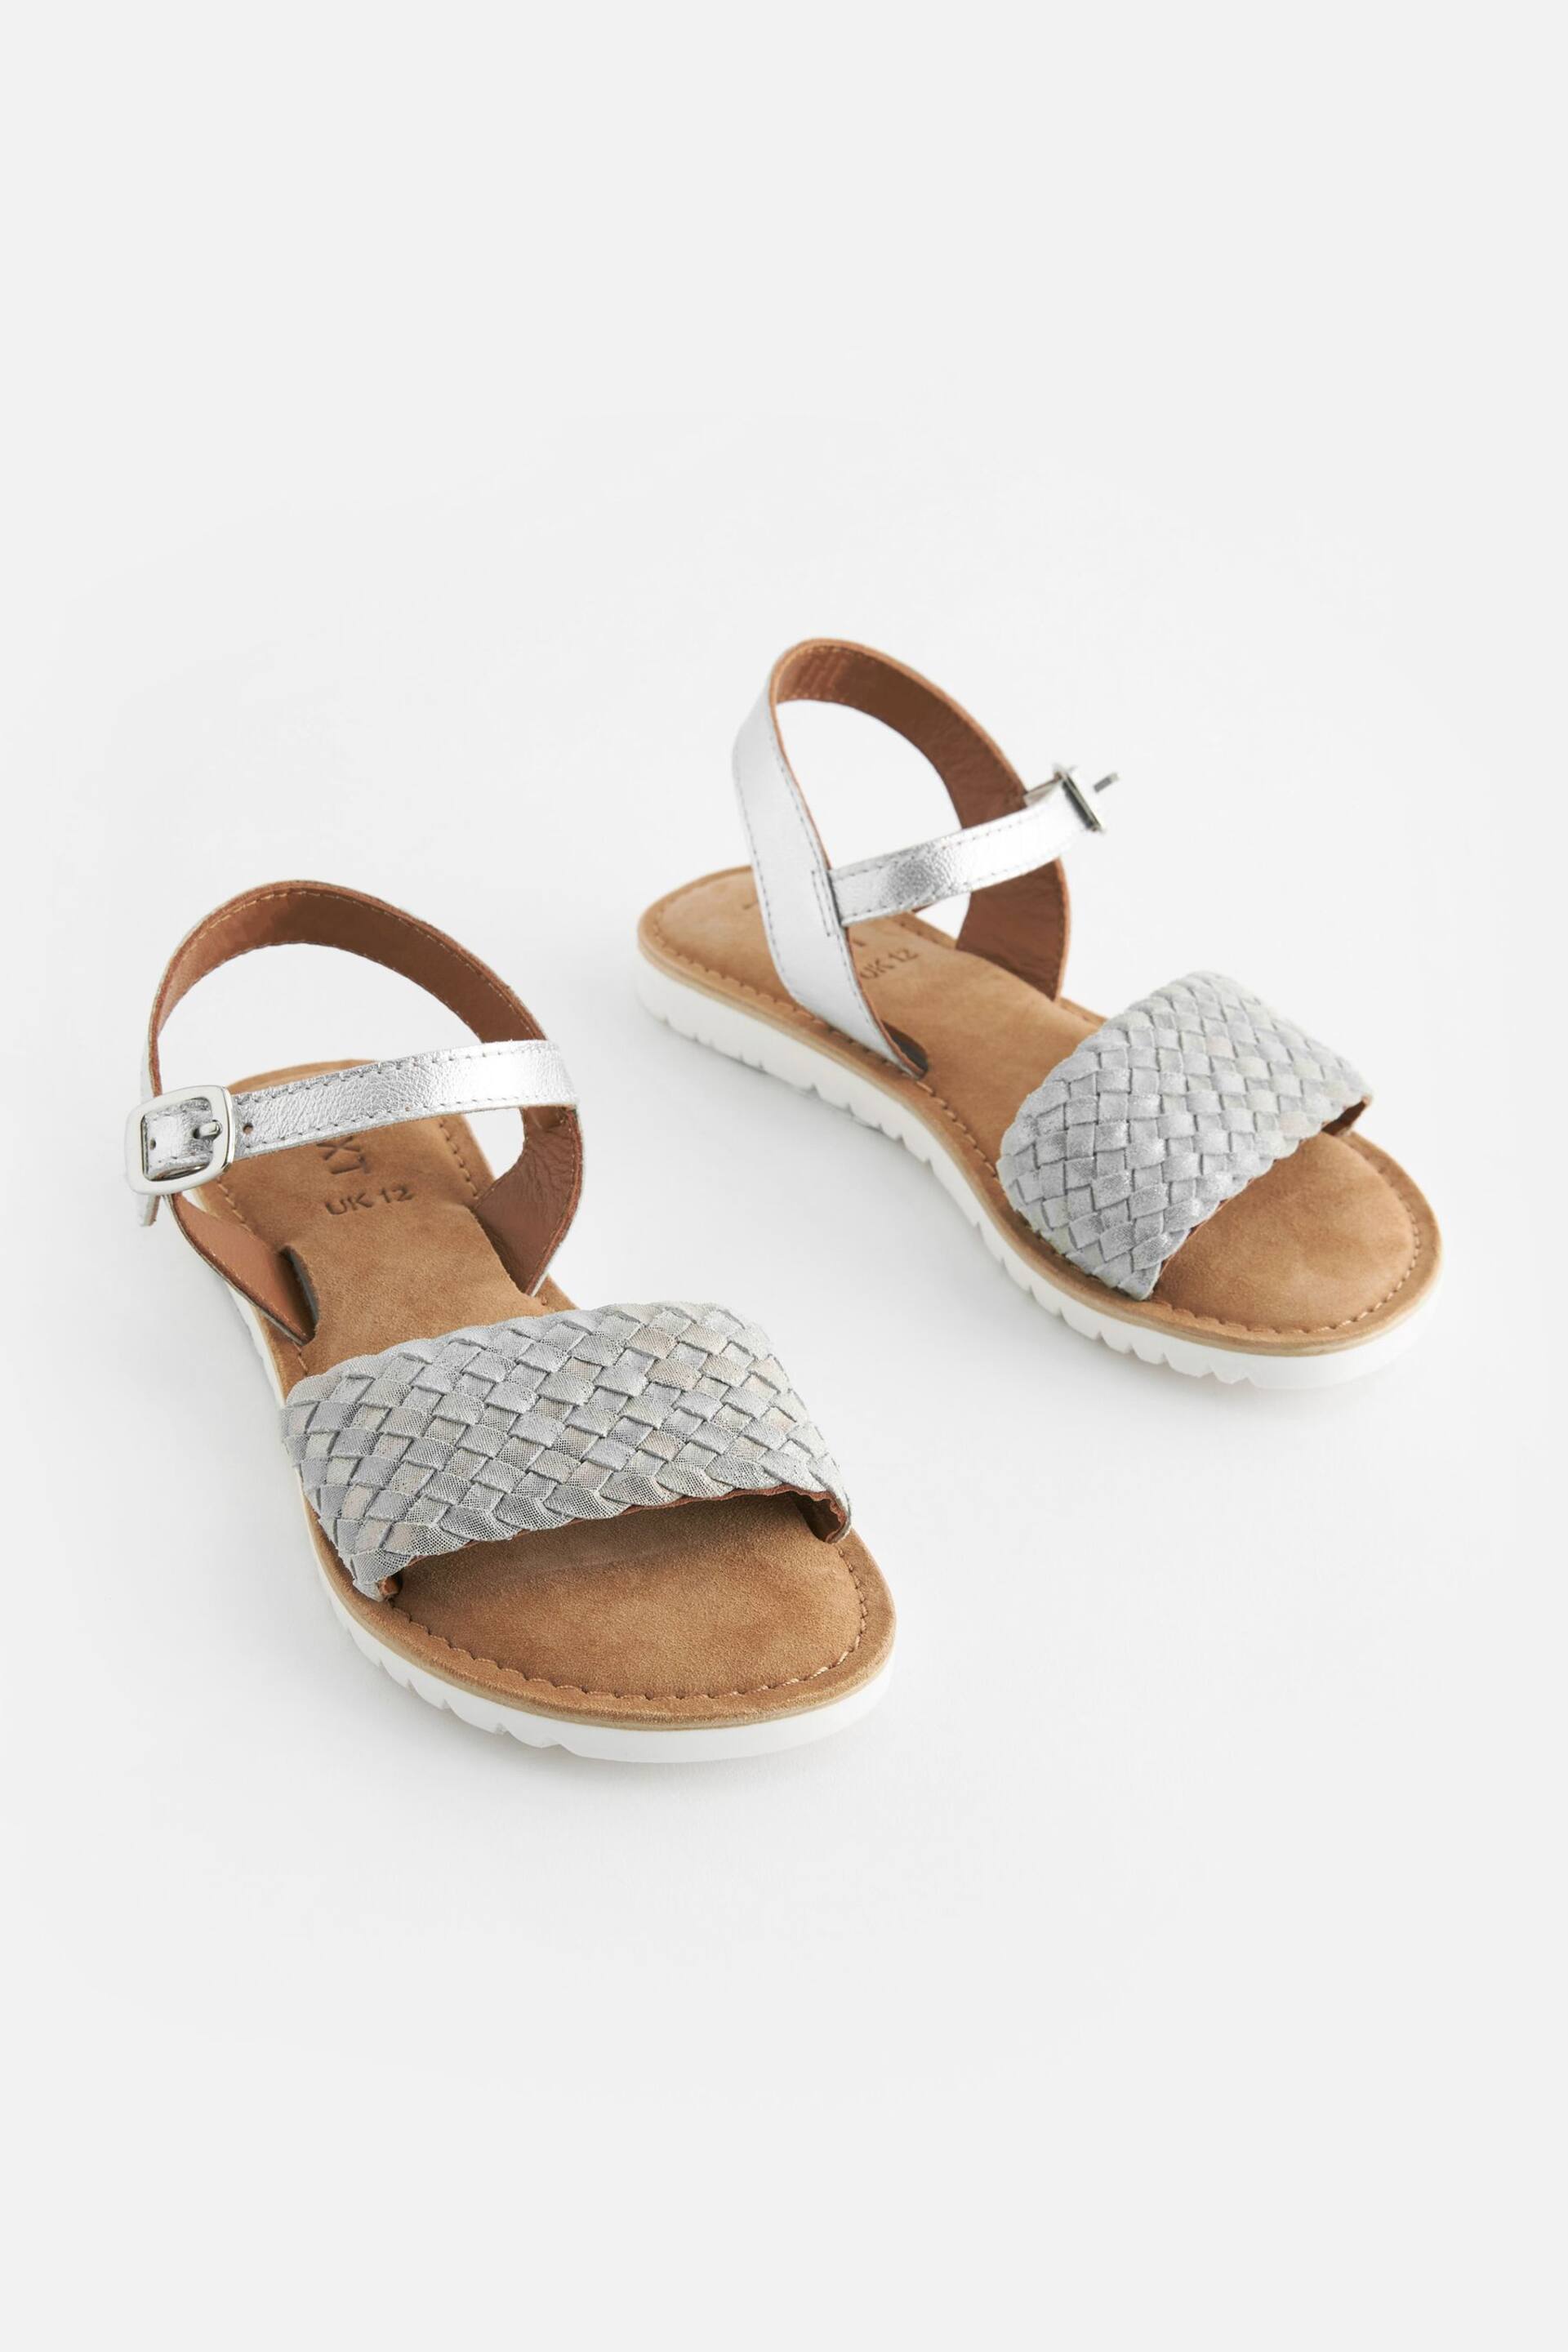 Silver Leather Woven Sandals - Image 2 of 6